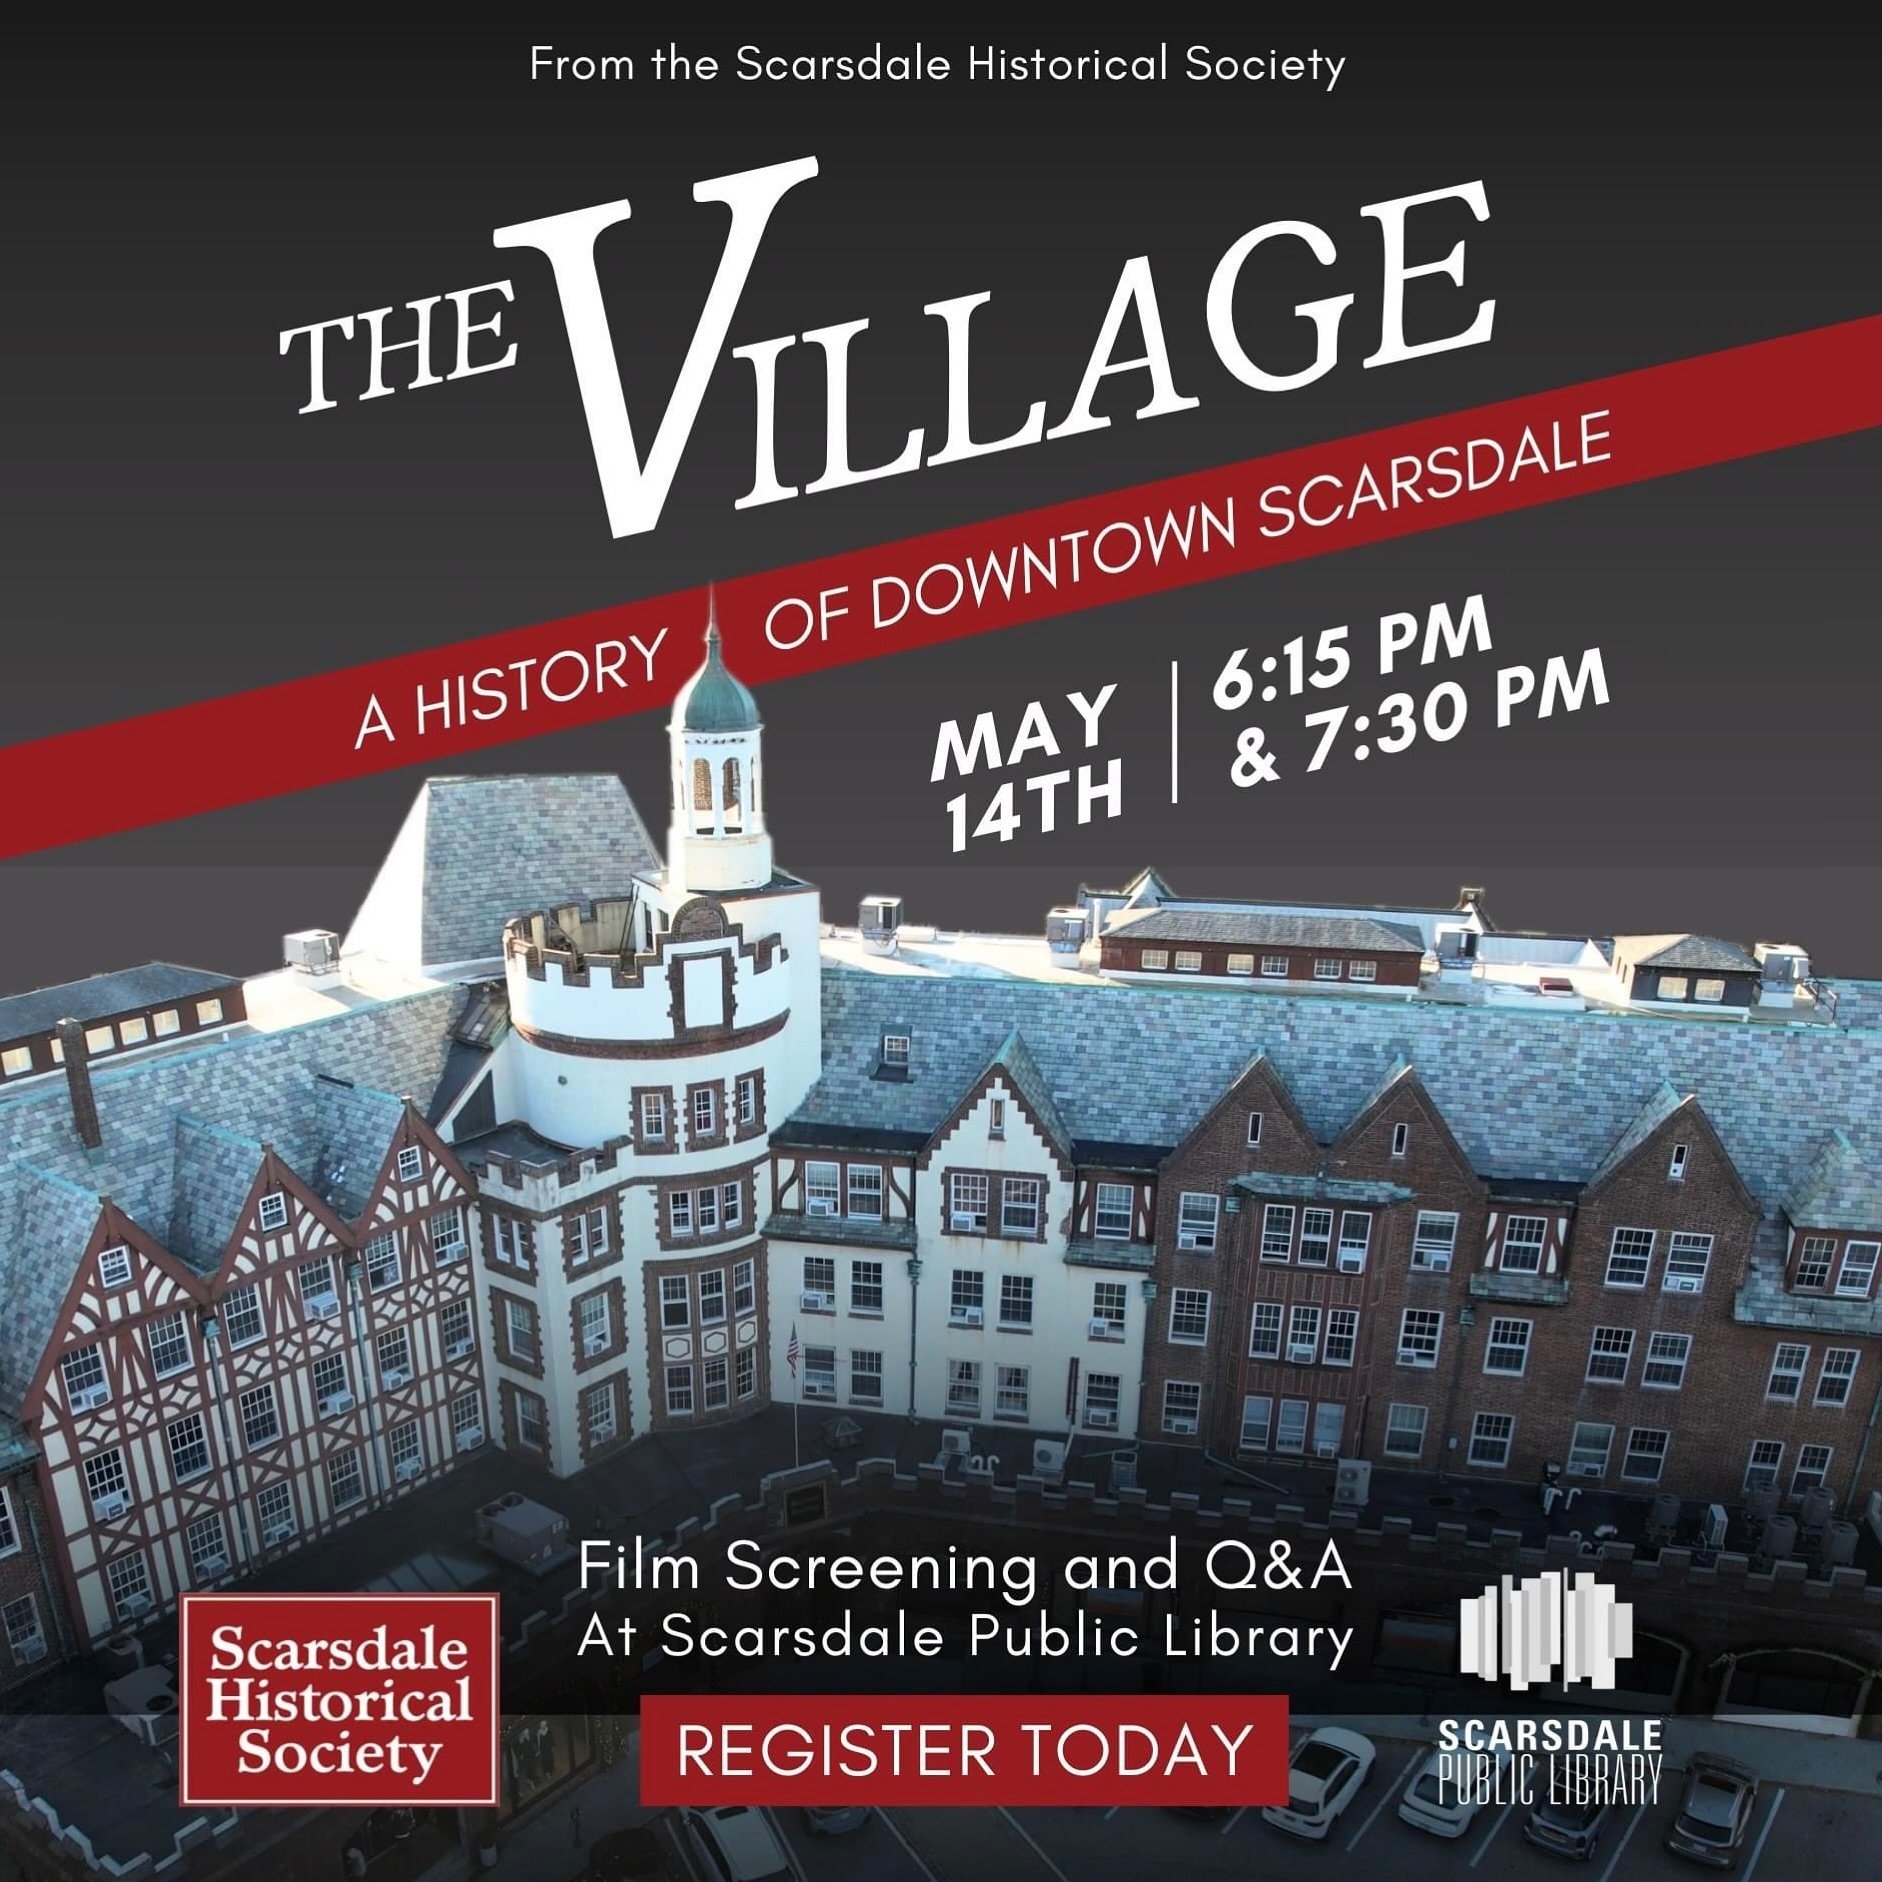 How do you like the film flyer for our new documentary premiering on Tuesday, May 14th at Scarsdale Public Library? Join us at 6:15 PM or 7:30 PM to see how Scarsdale&rsquo;s business district grew from a humble train depot and a few wooden buildings